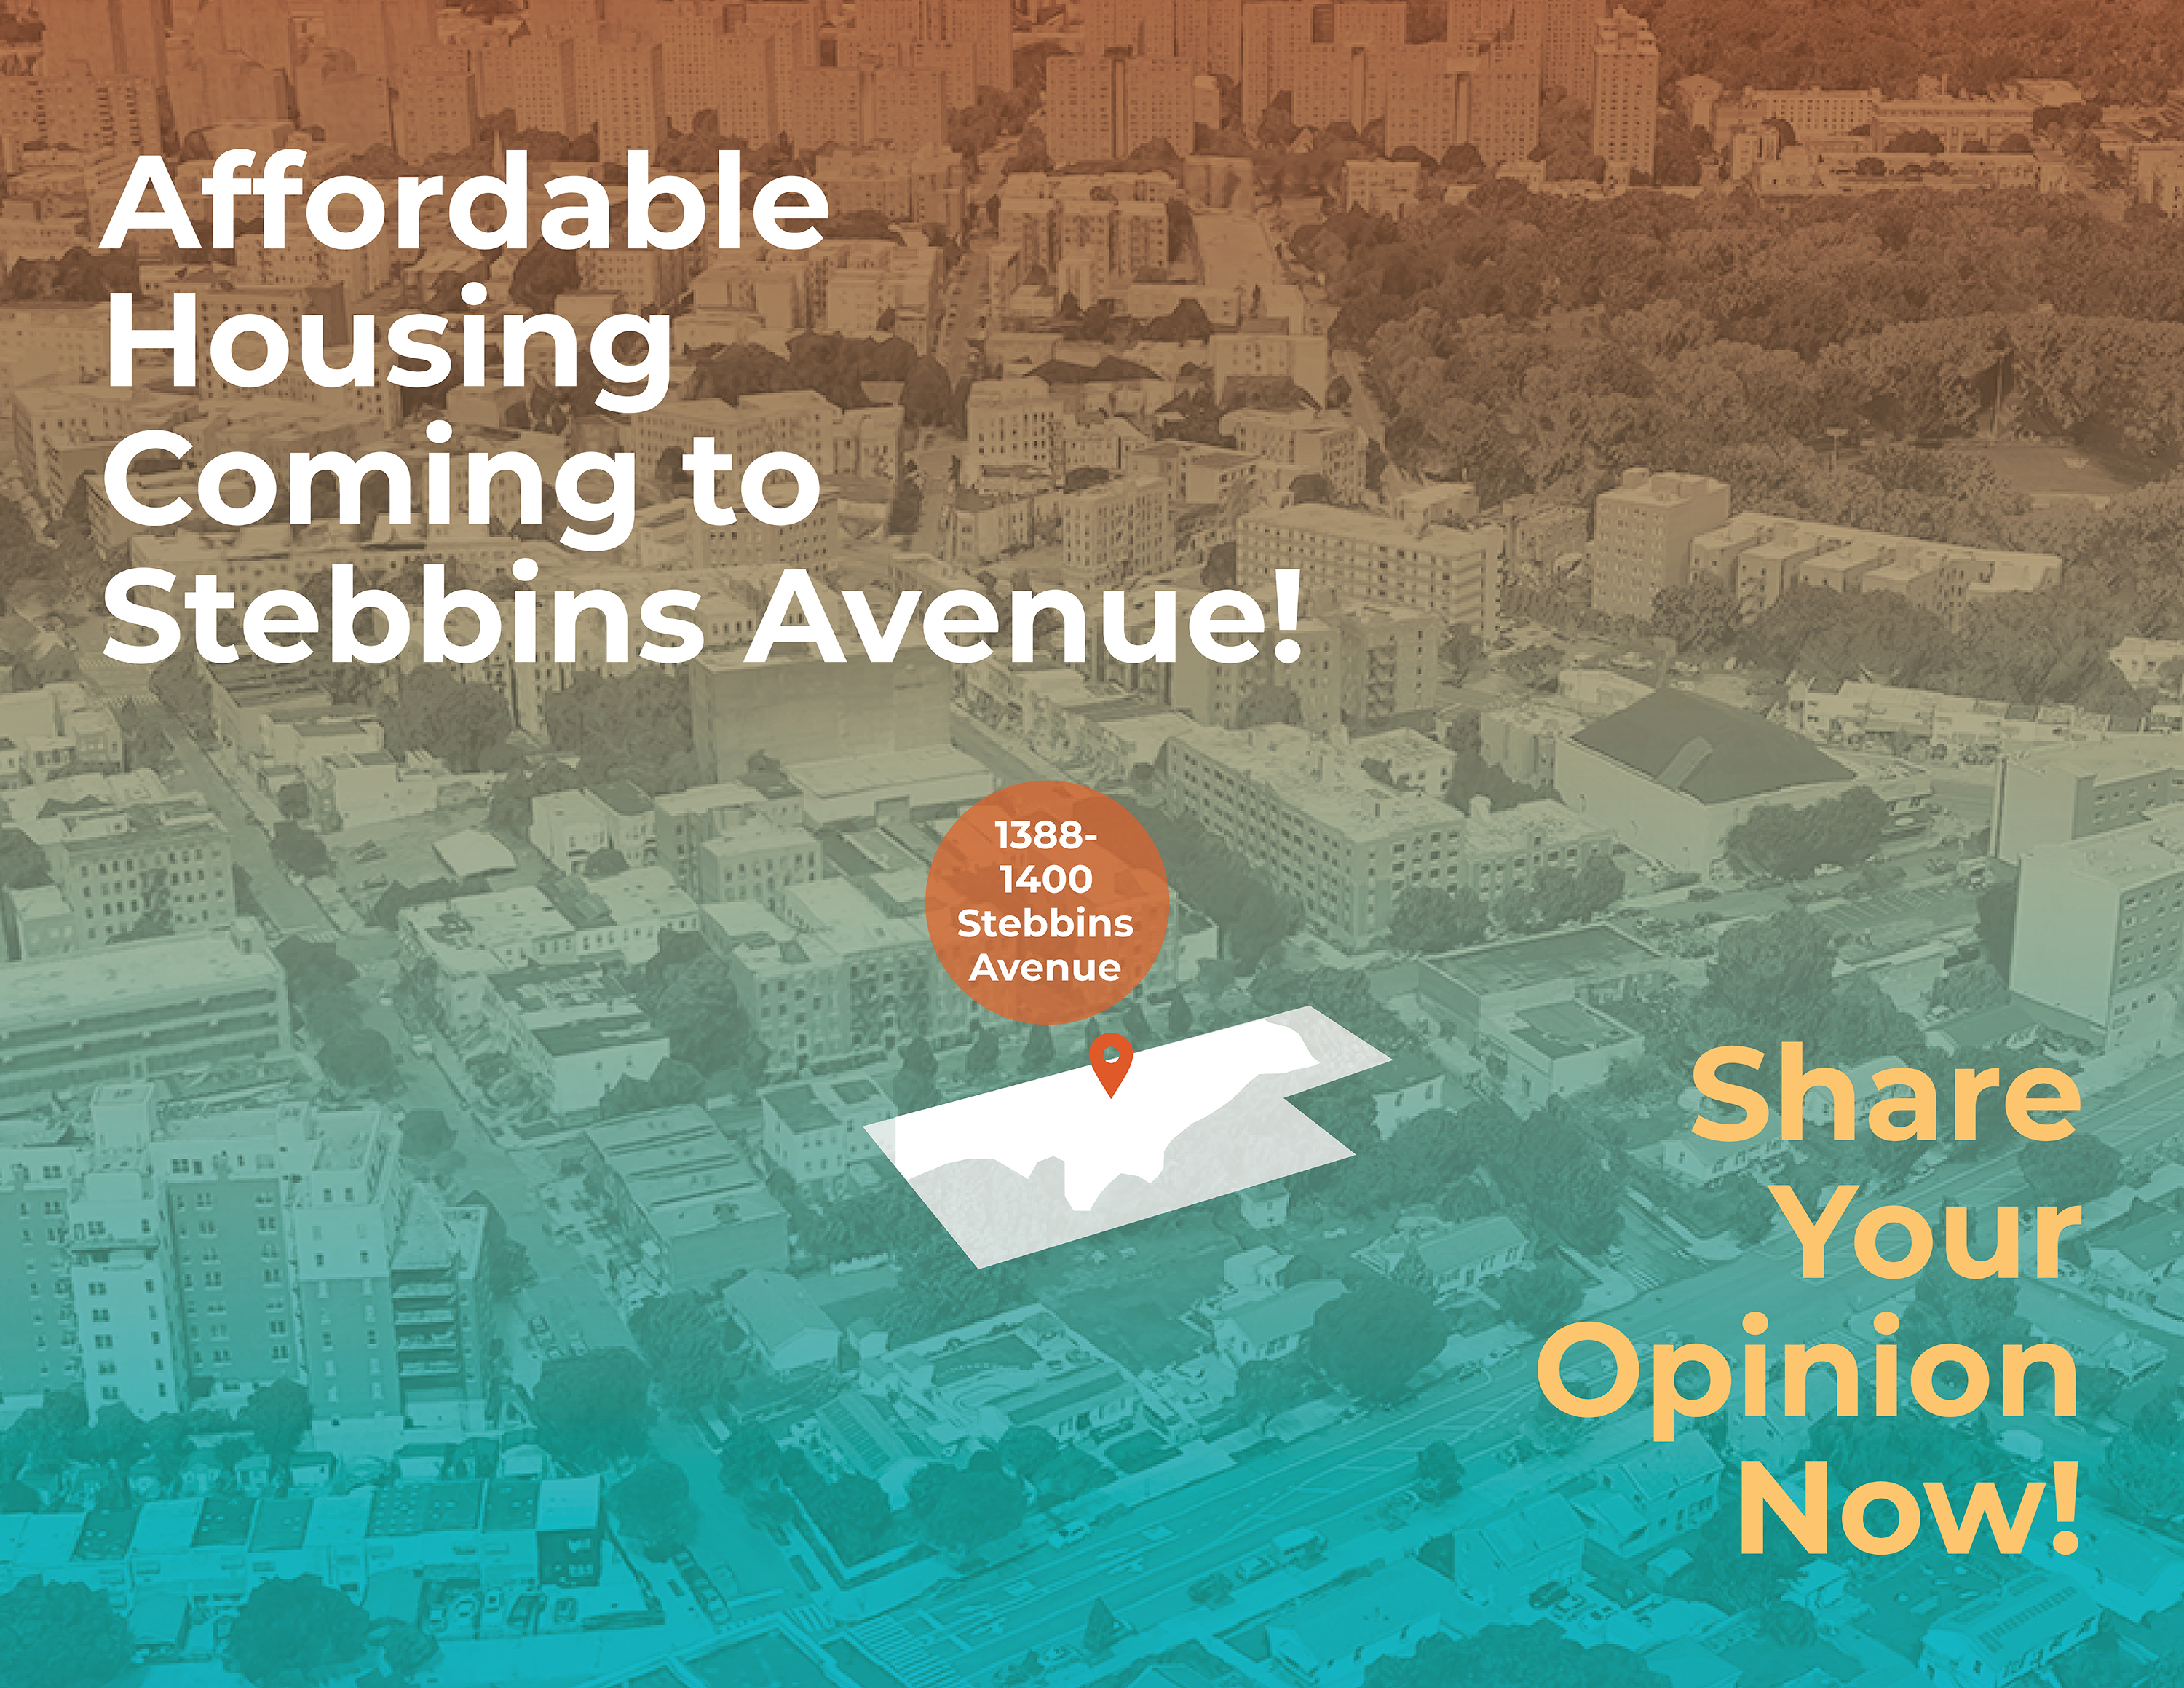 Affordable housing coming to Stebbins Avenue | Share your opinion now